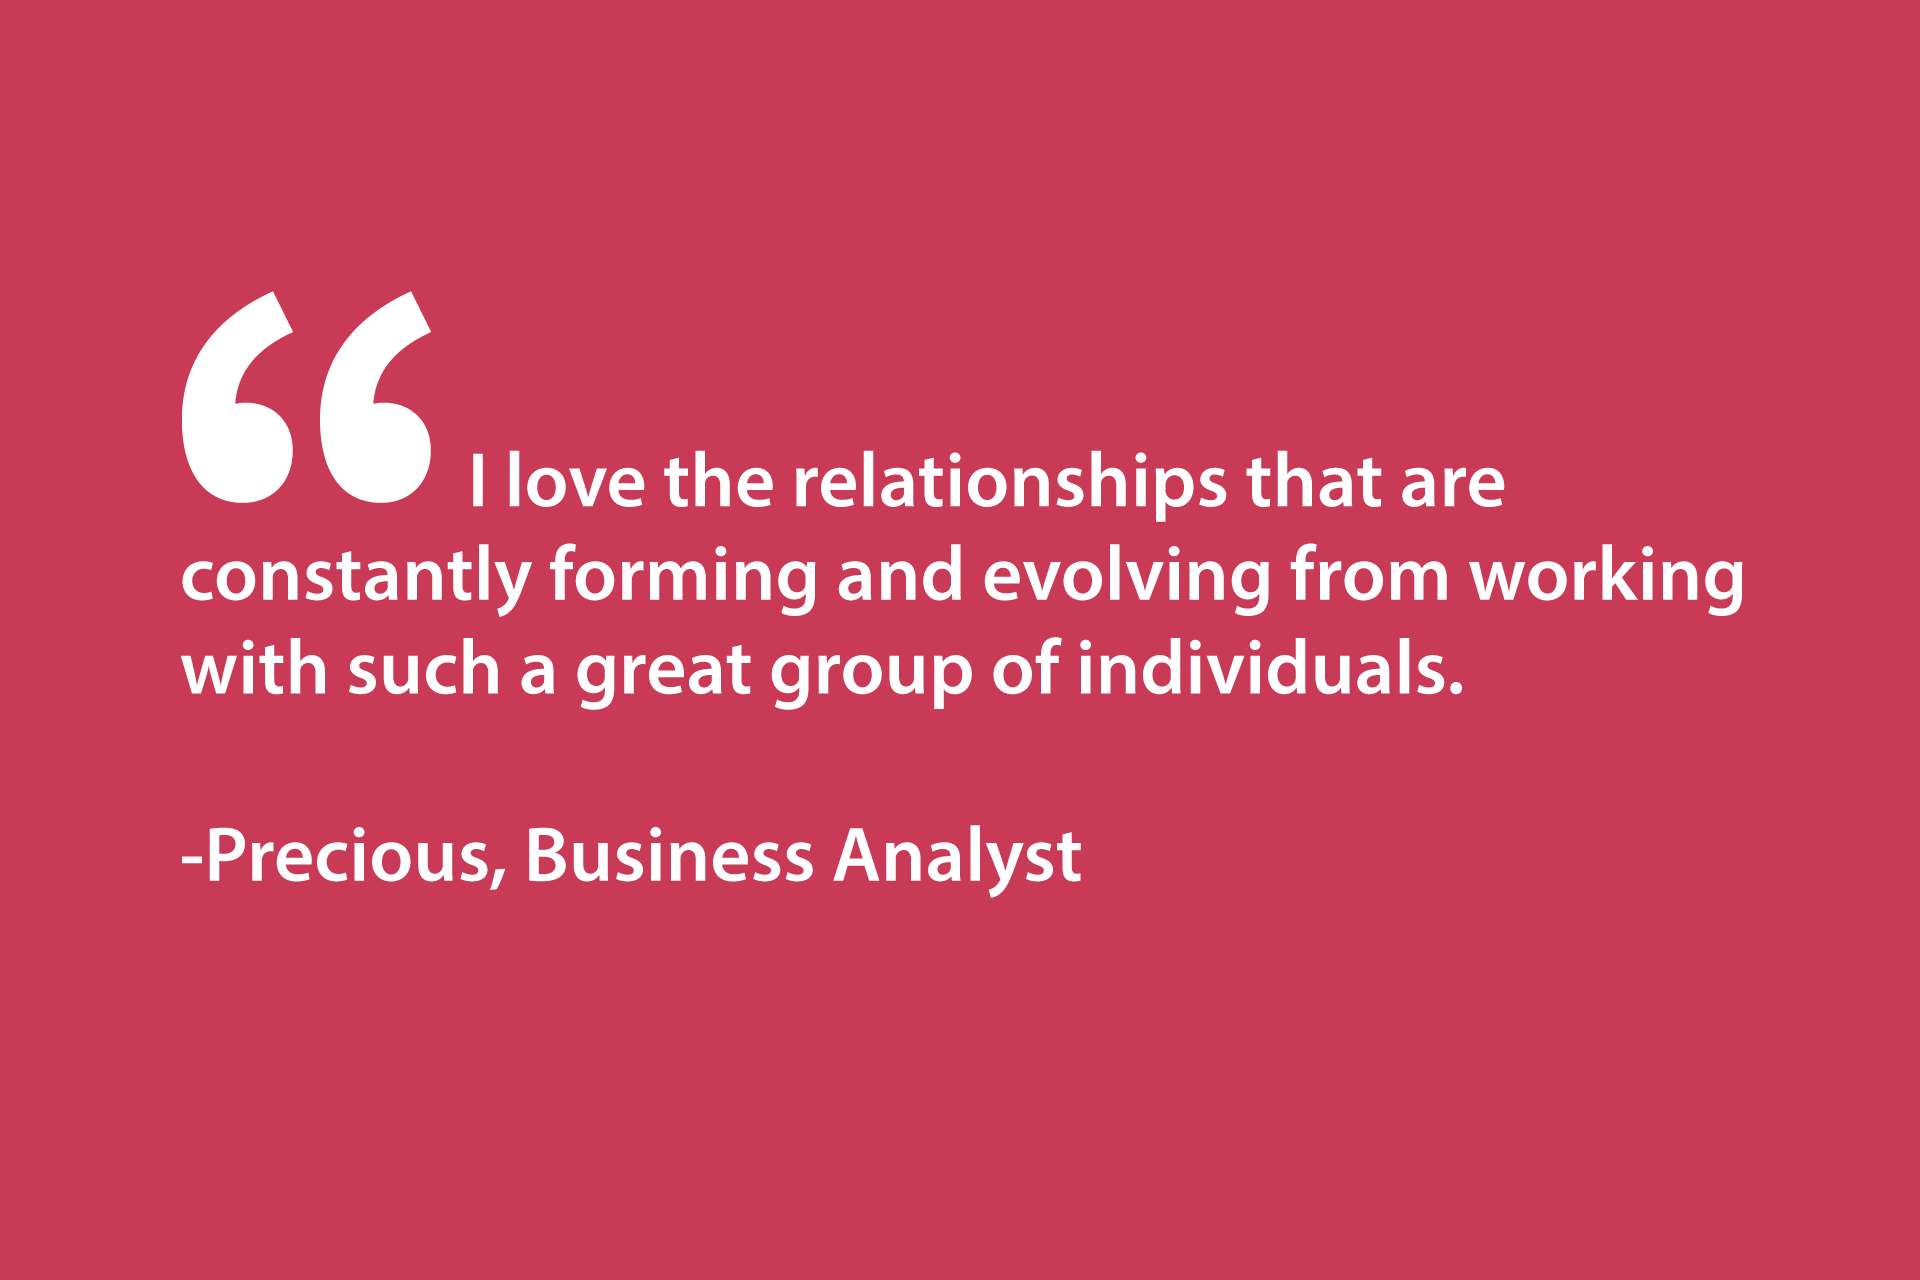 I love the relationships that are constantly forming and evolving from working with such a great group of individuals. -Precious, Business Analyst